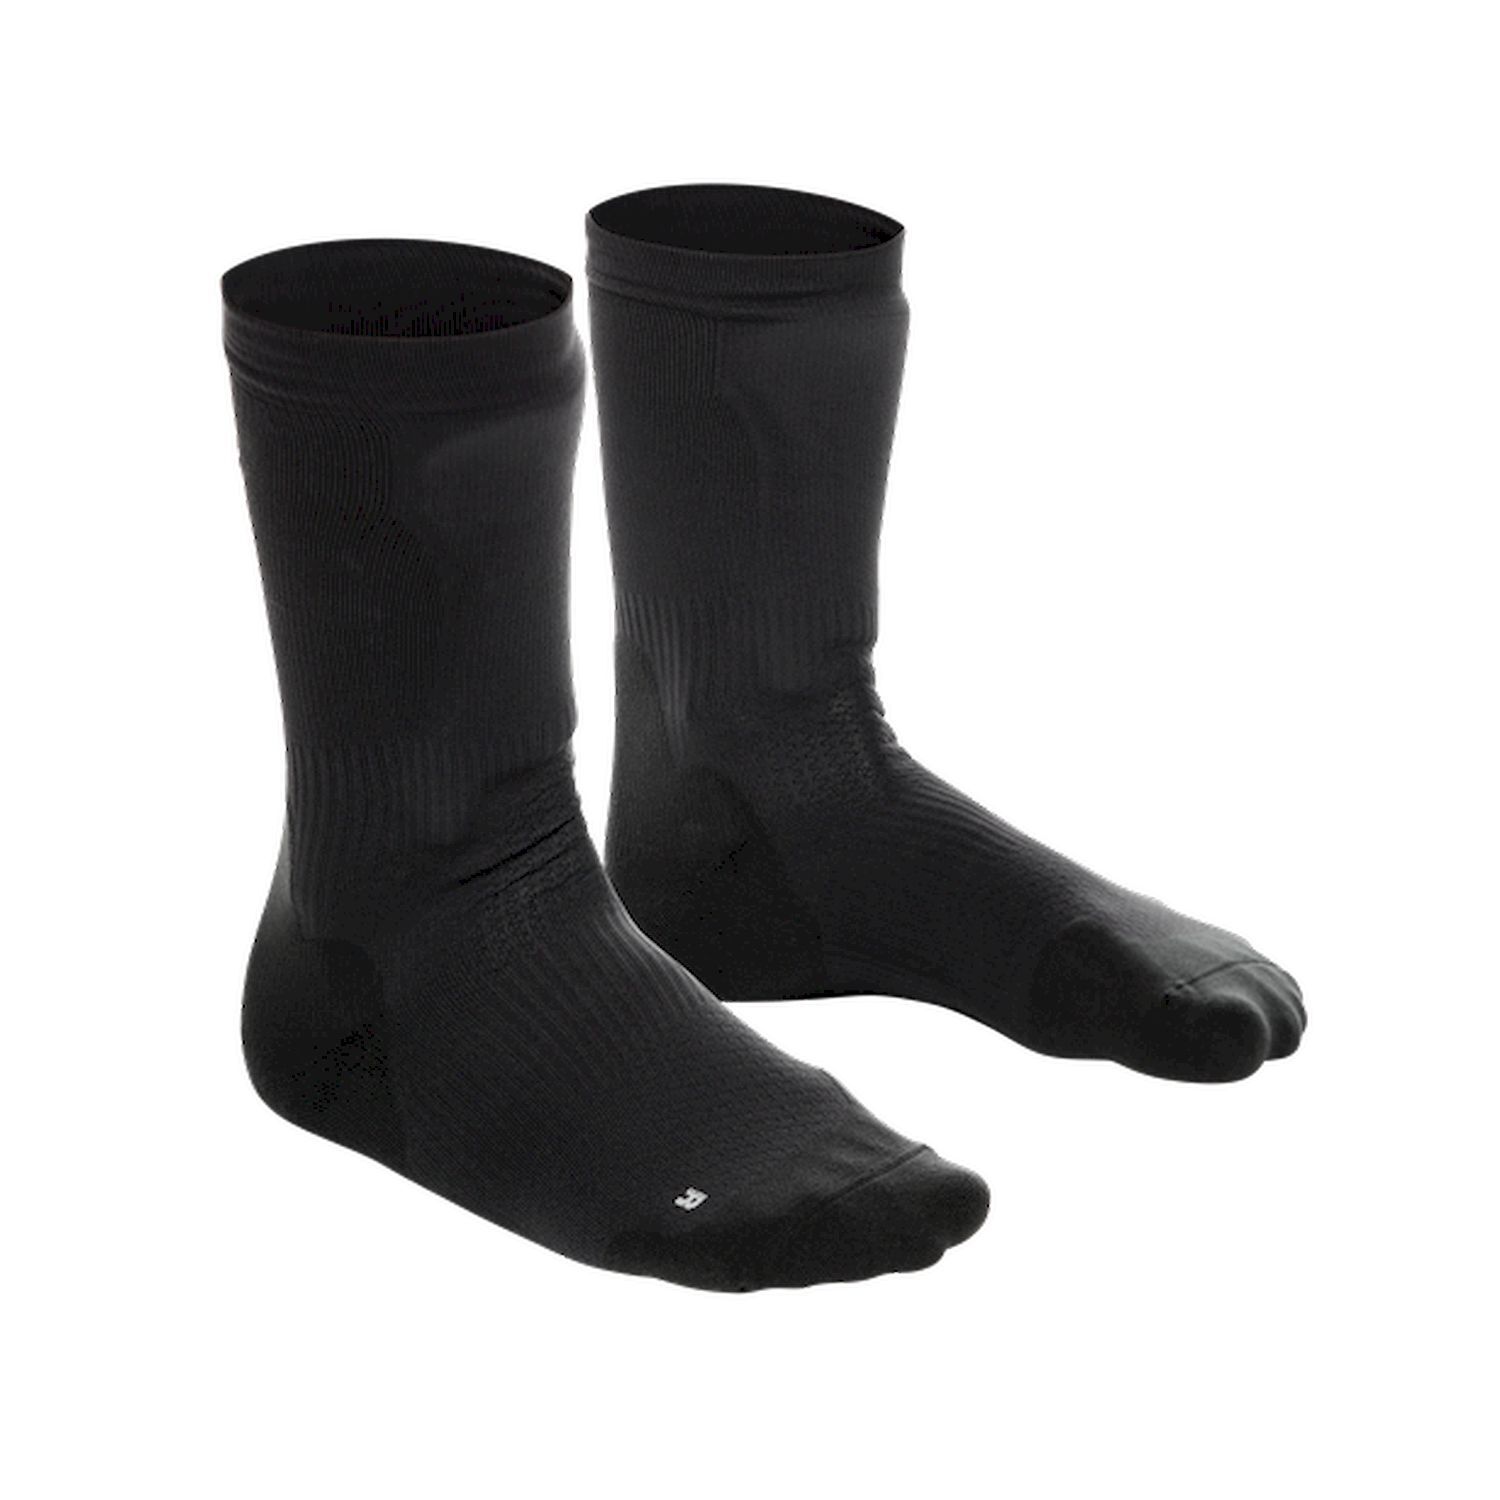 Dainese Hgr - Chaussettes vélo | Hardloop